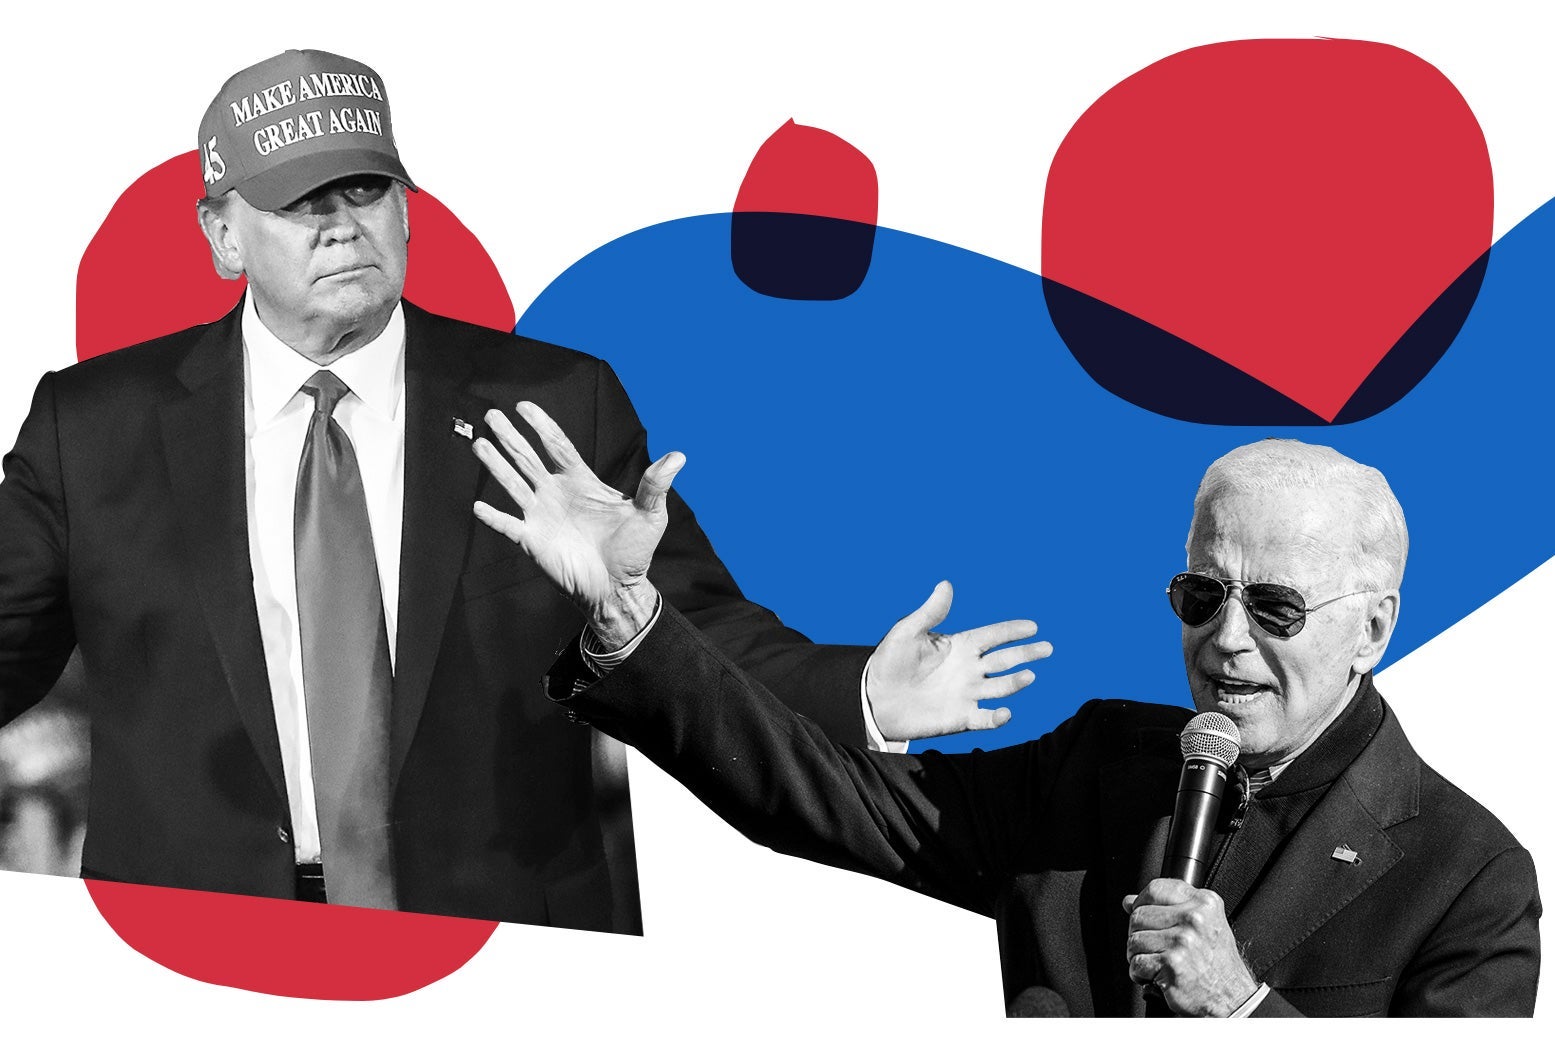 Donald Trump and Joe Biden campaign, arms outstretched toward each other, in front of blue and red shapes.